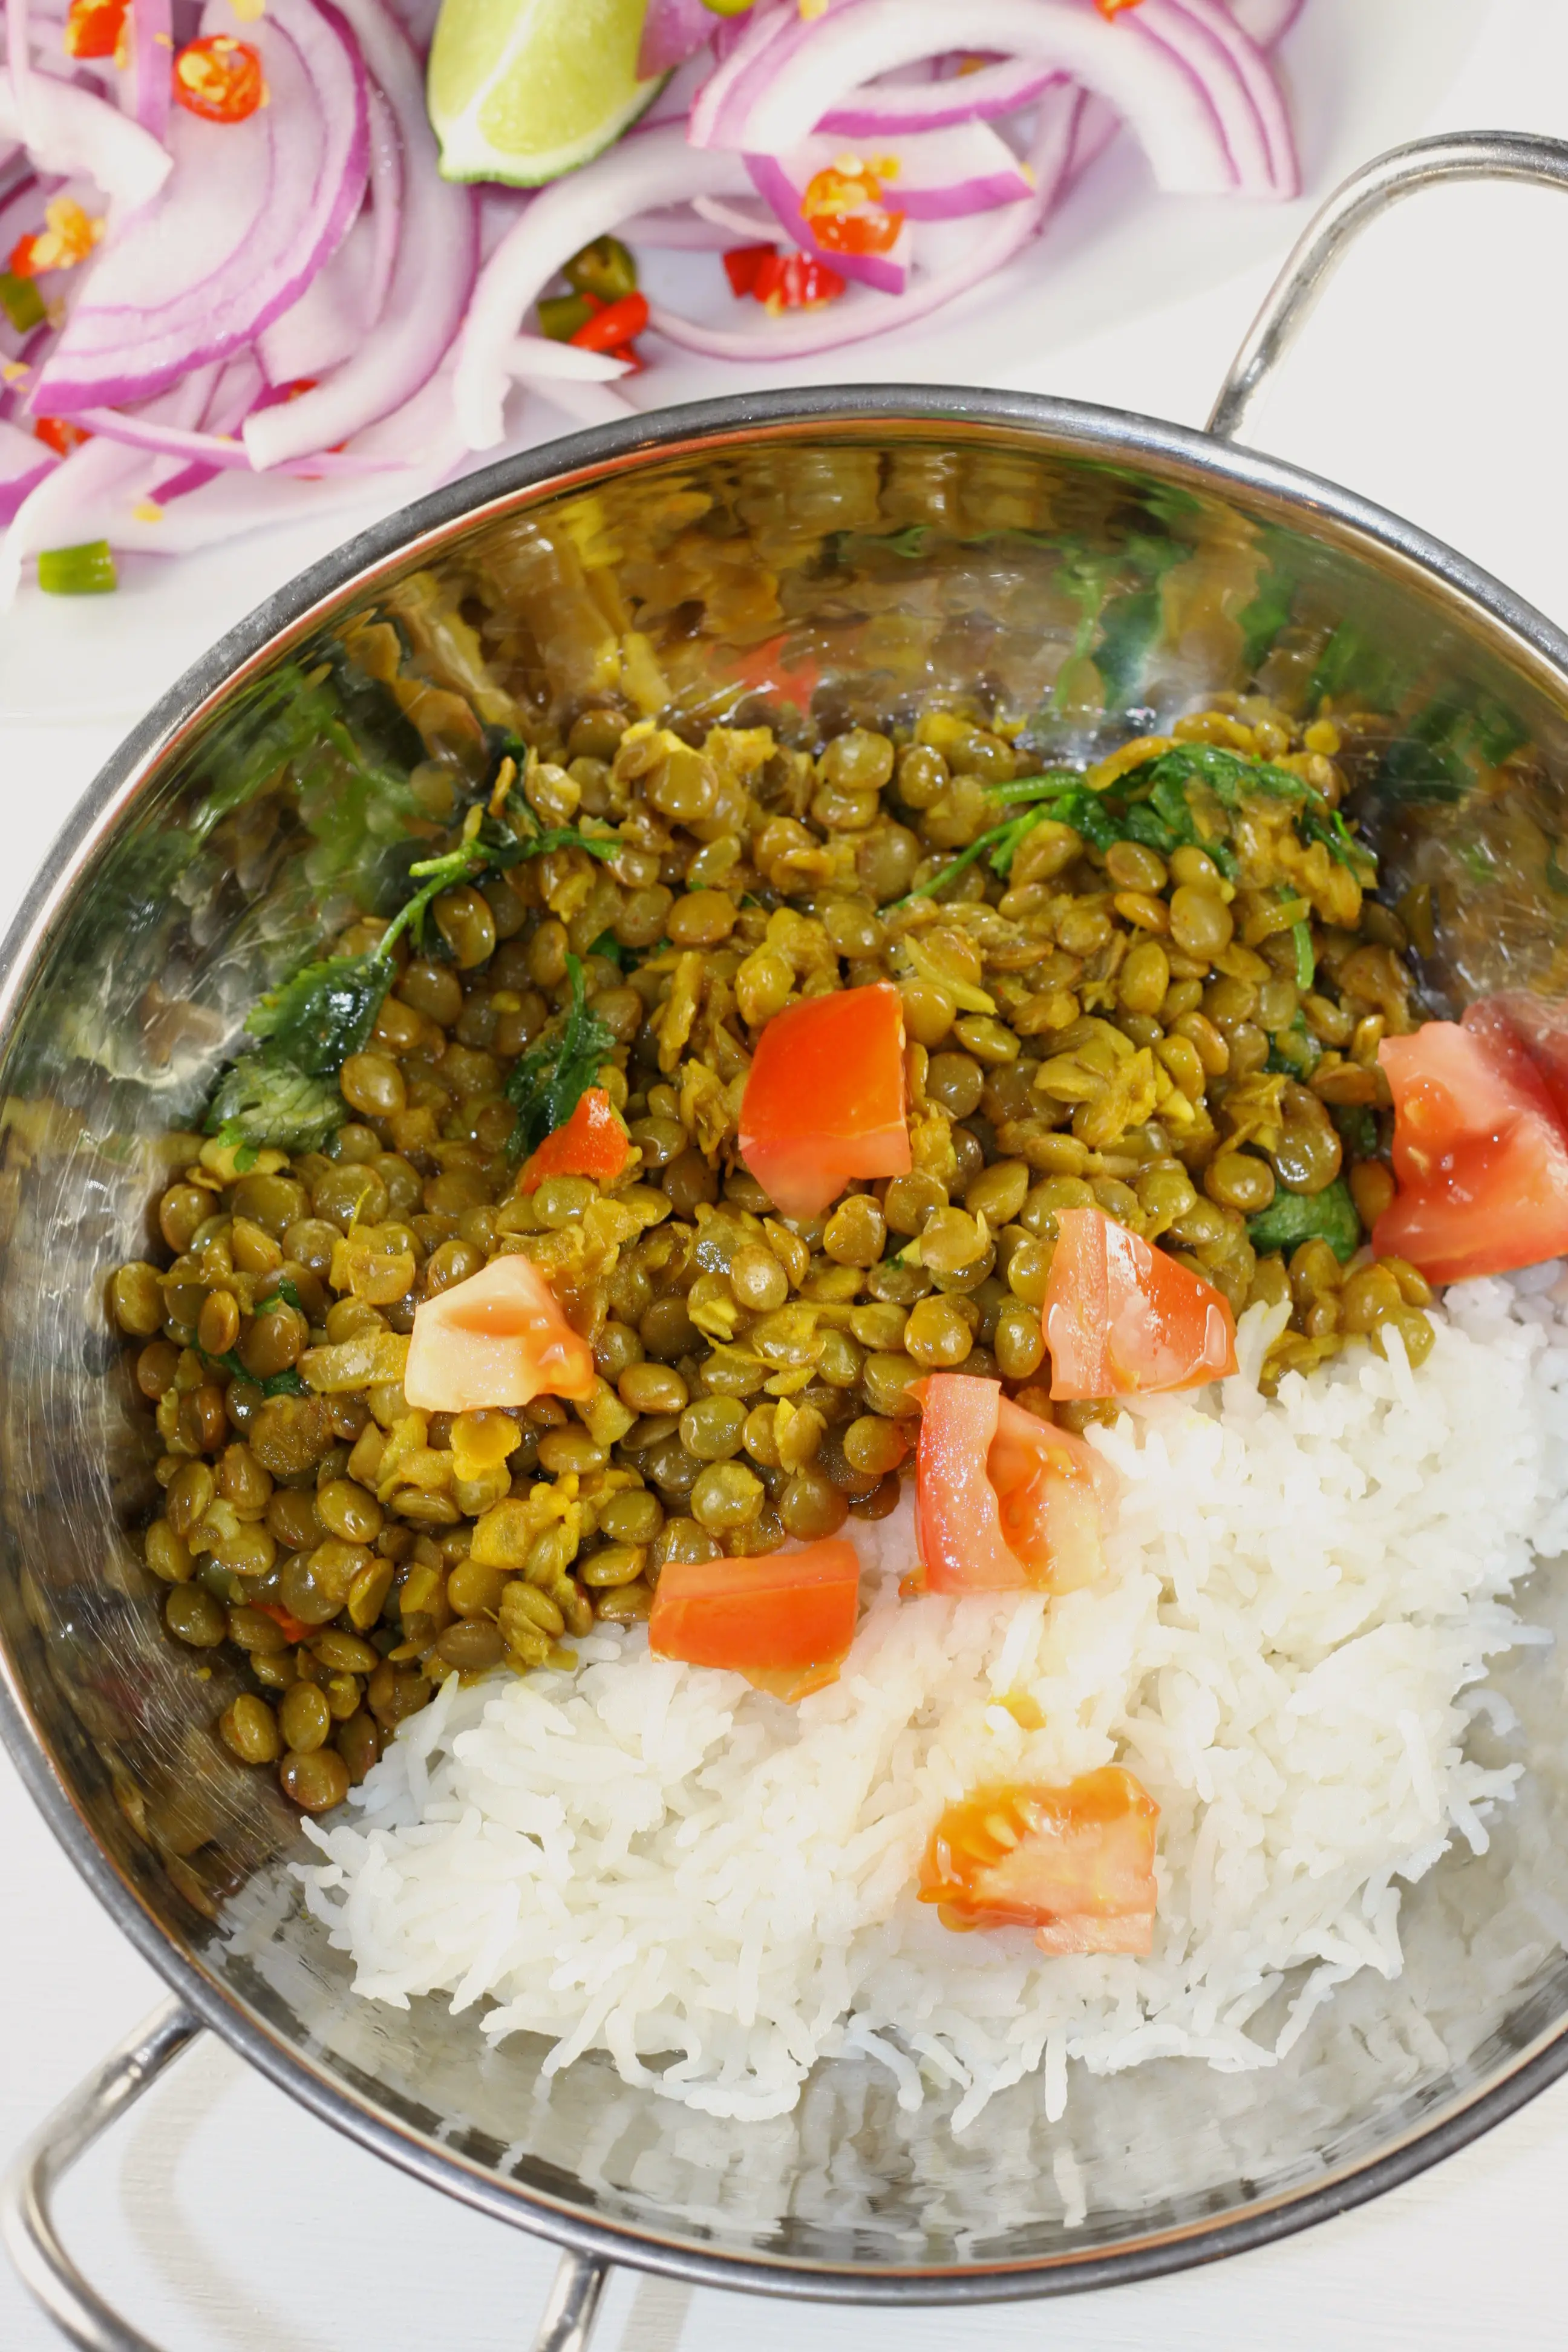 Indian Spiced Lentils With Onion Salad and rice in a bowl